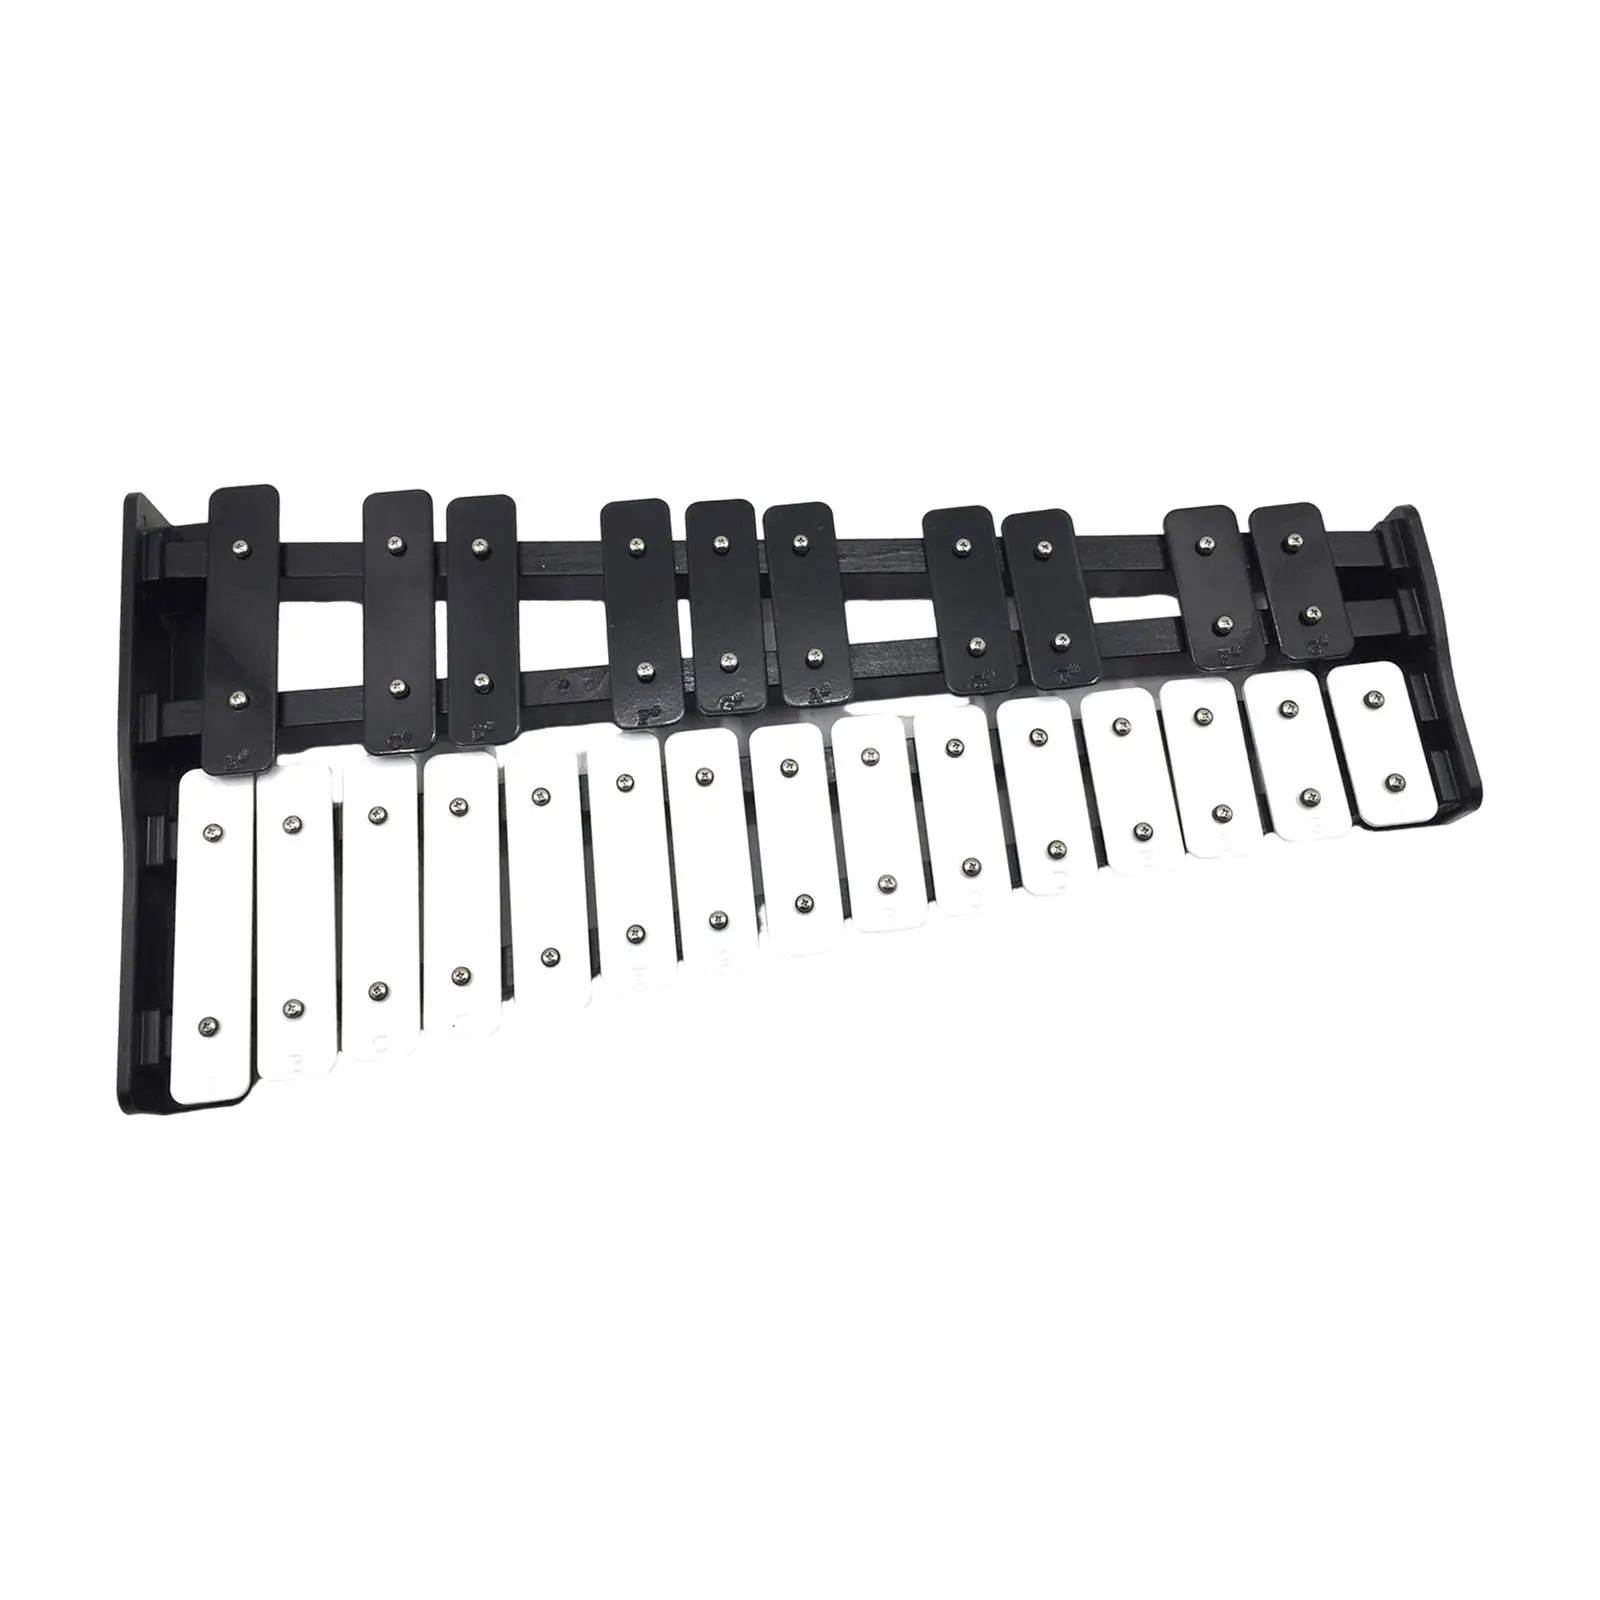 Xylophone for Beginners Compact Gifts Professional 25 Key Glockenspiel